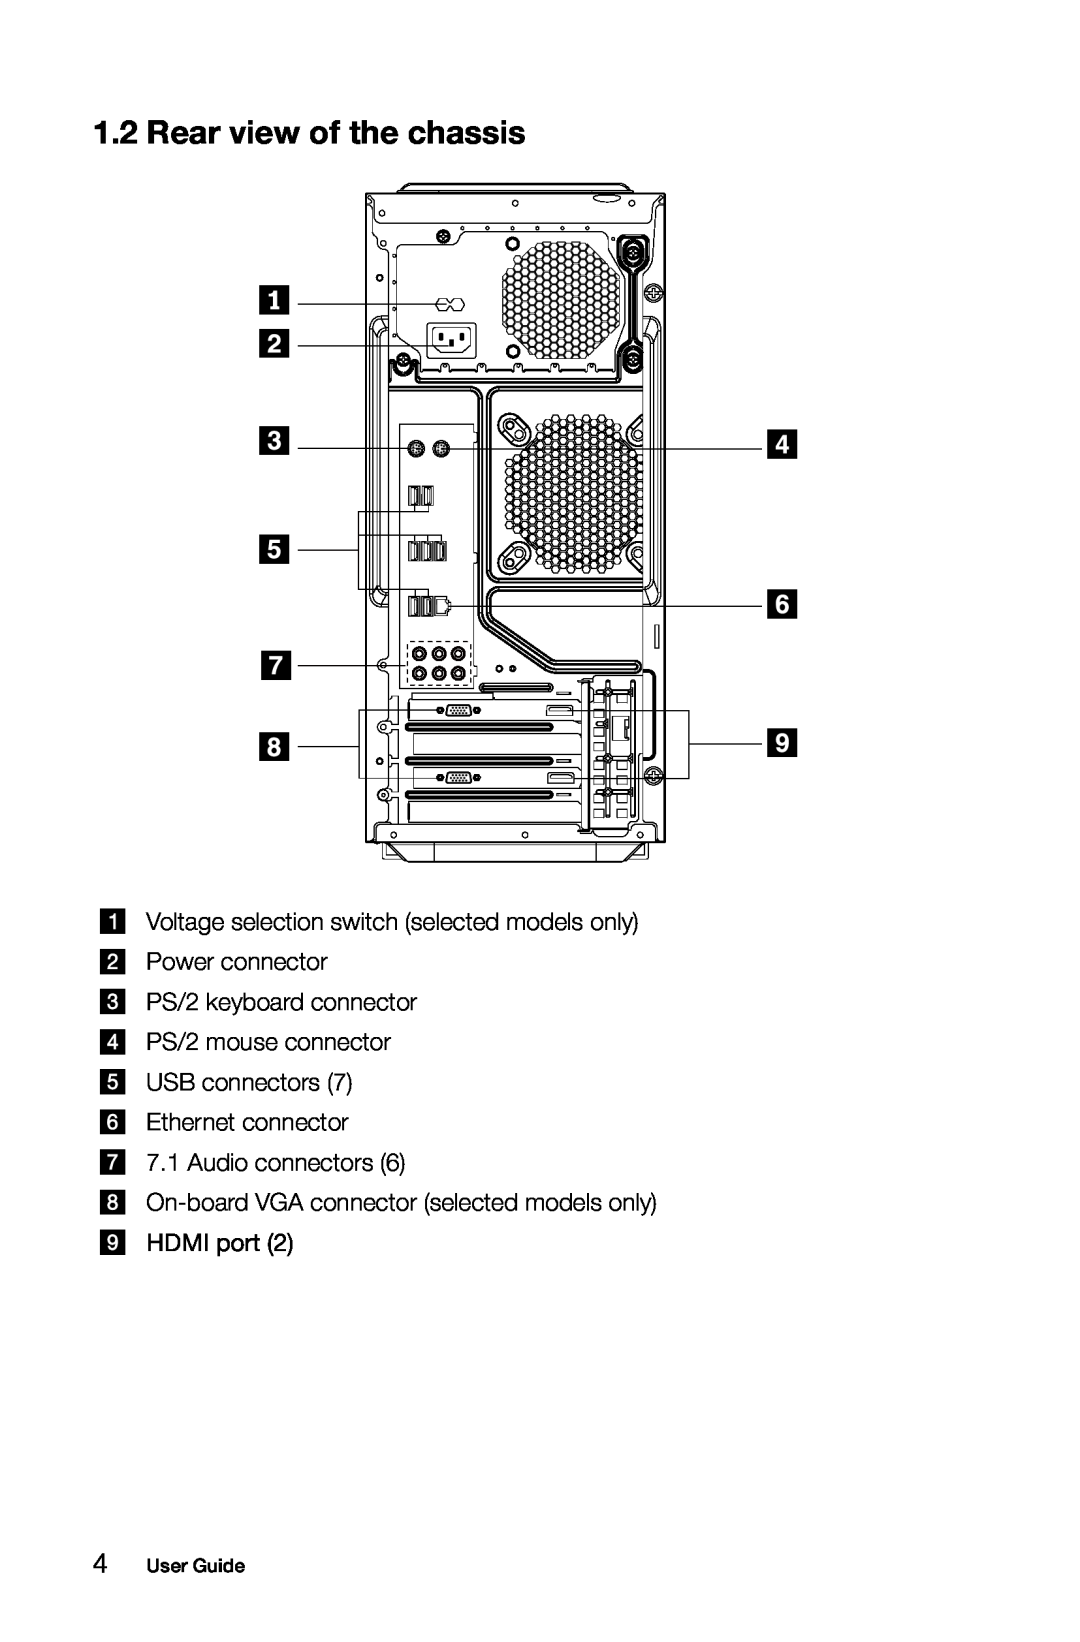 Lenovo K3 manual Rear view of the chassis, Voltage selection switch selected models only Power connector, Audio connectors 